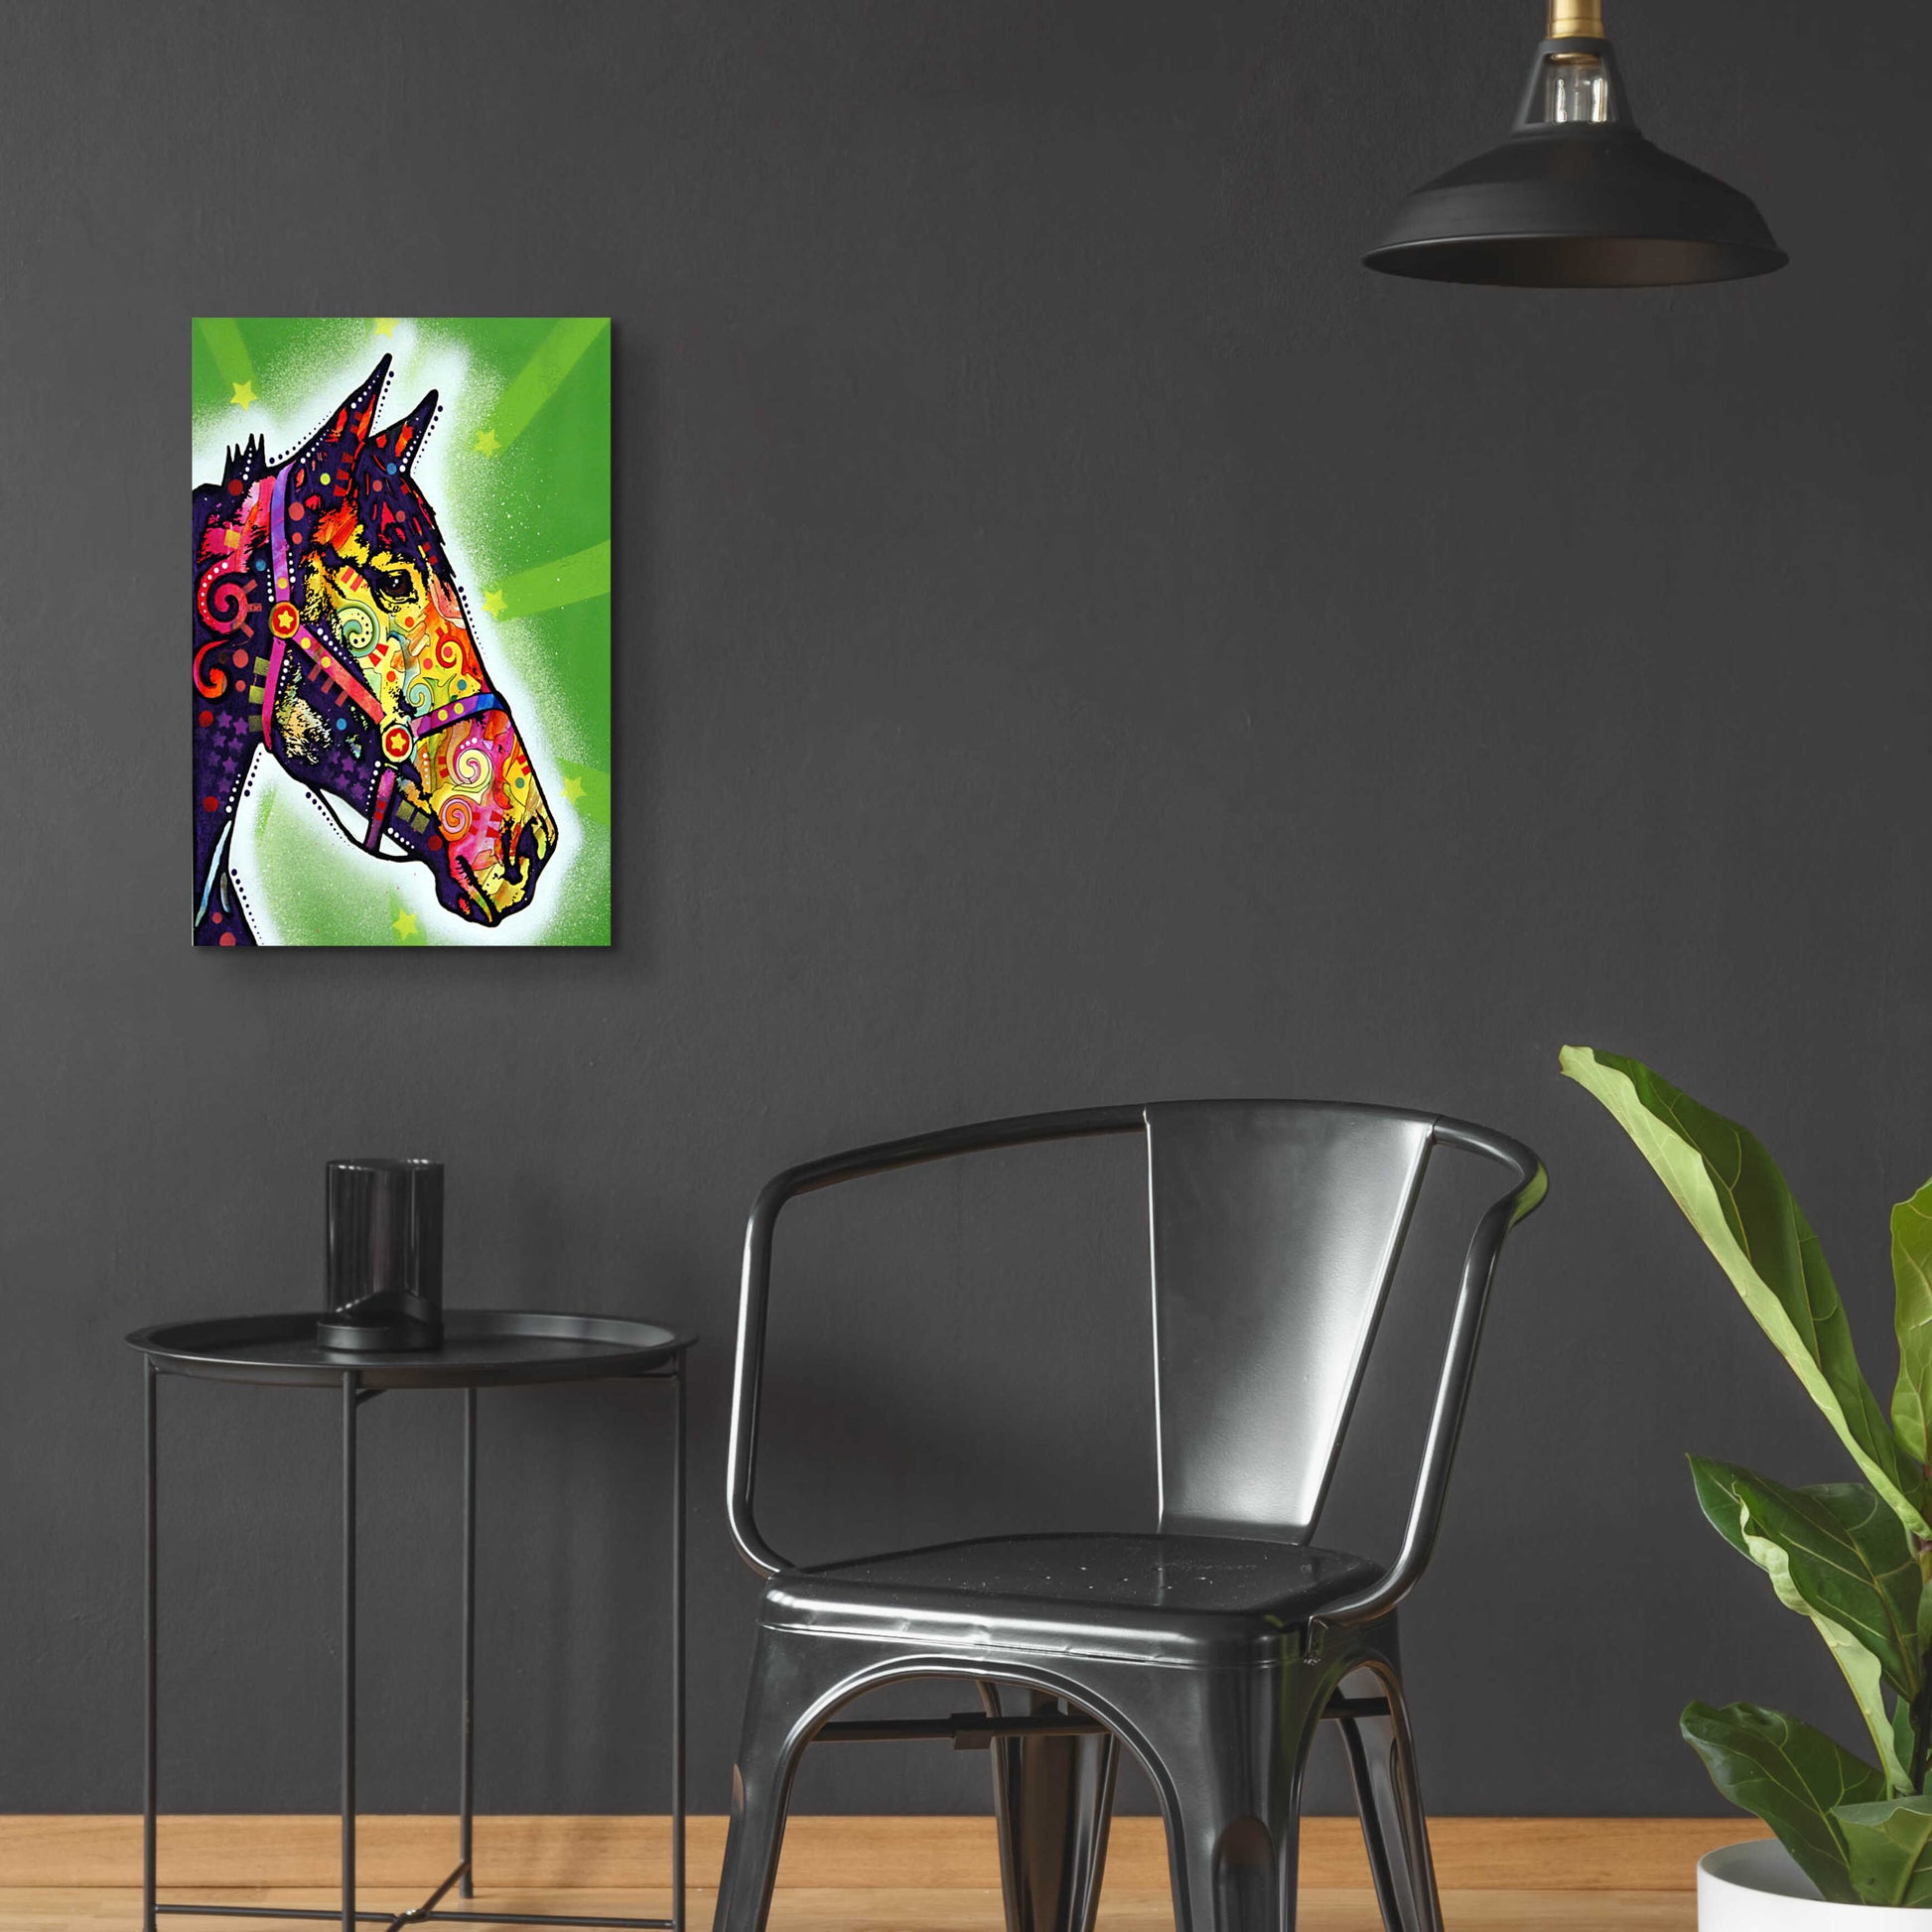 Epic Art 'Horse 2' by Dean Russo, Acrylic Glass Wall Art,16x24